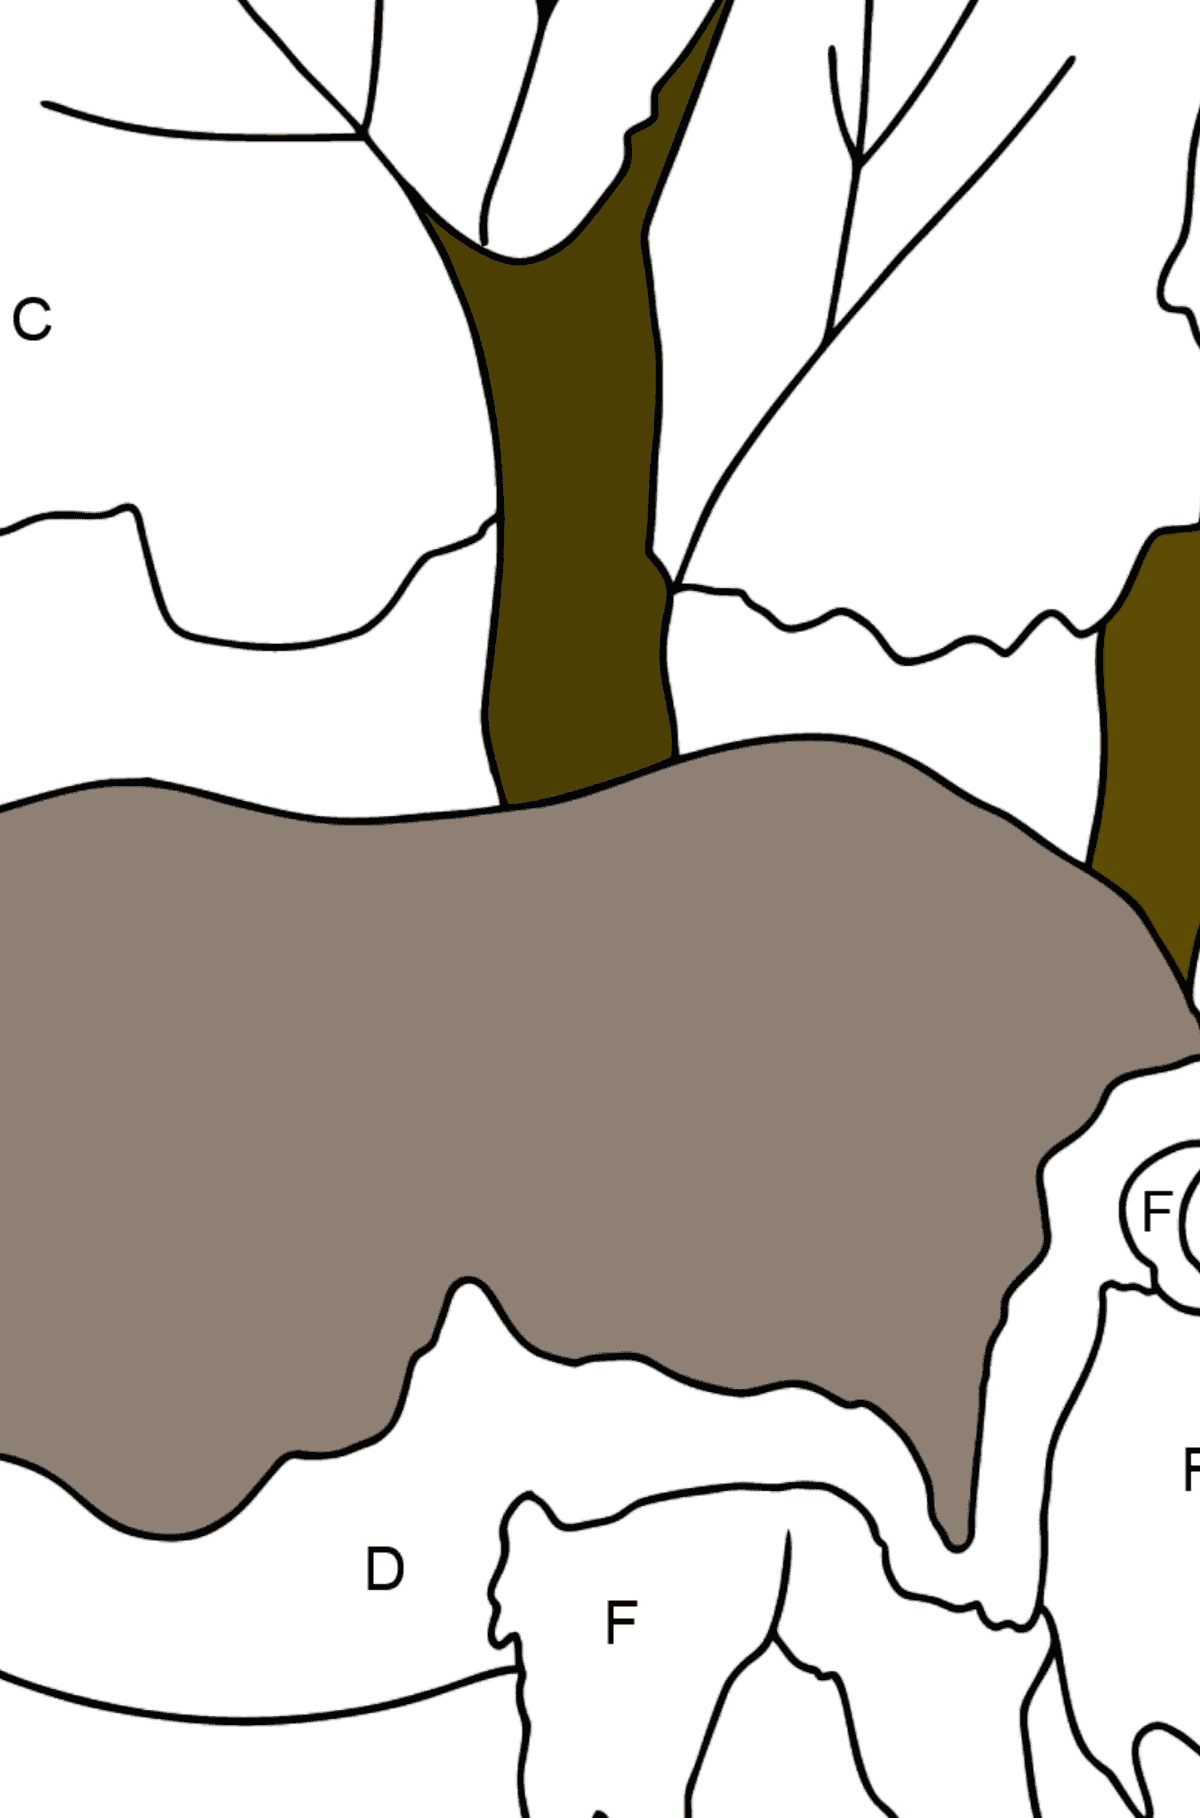 Coloring Page - A Massive Rhino - Coloring by Letters for Kids